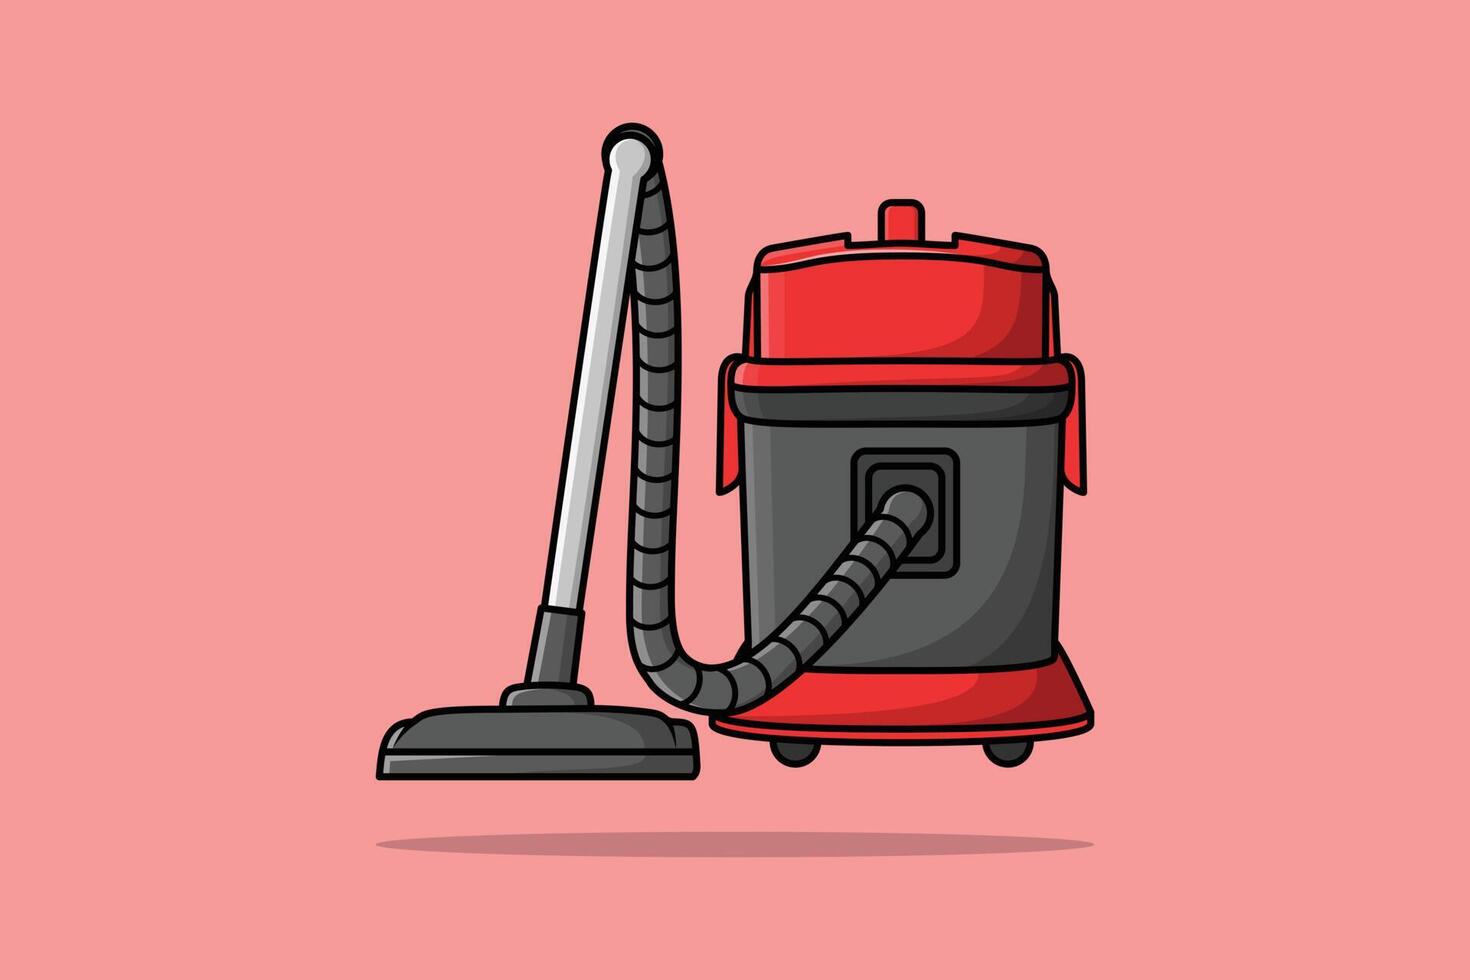 Vacuum Cleaner Machine vector illustration. Cleaning service object icon concept. Home cleaner equipment vector design.